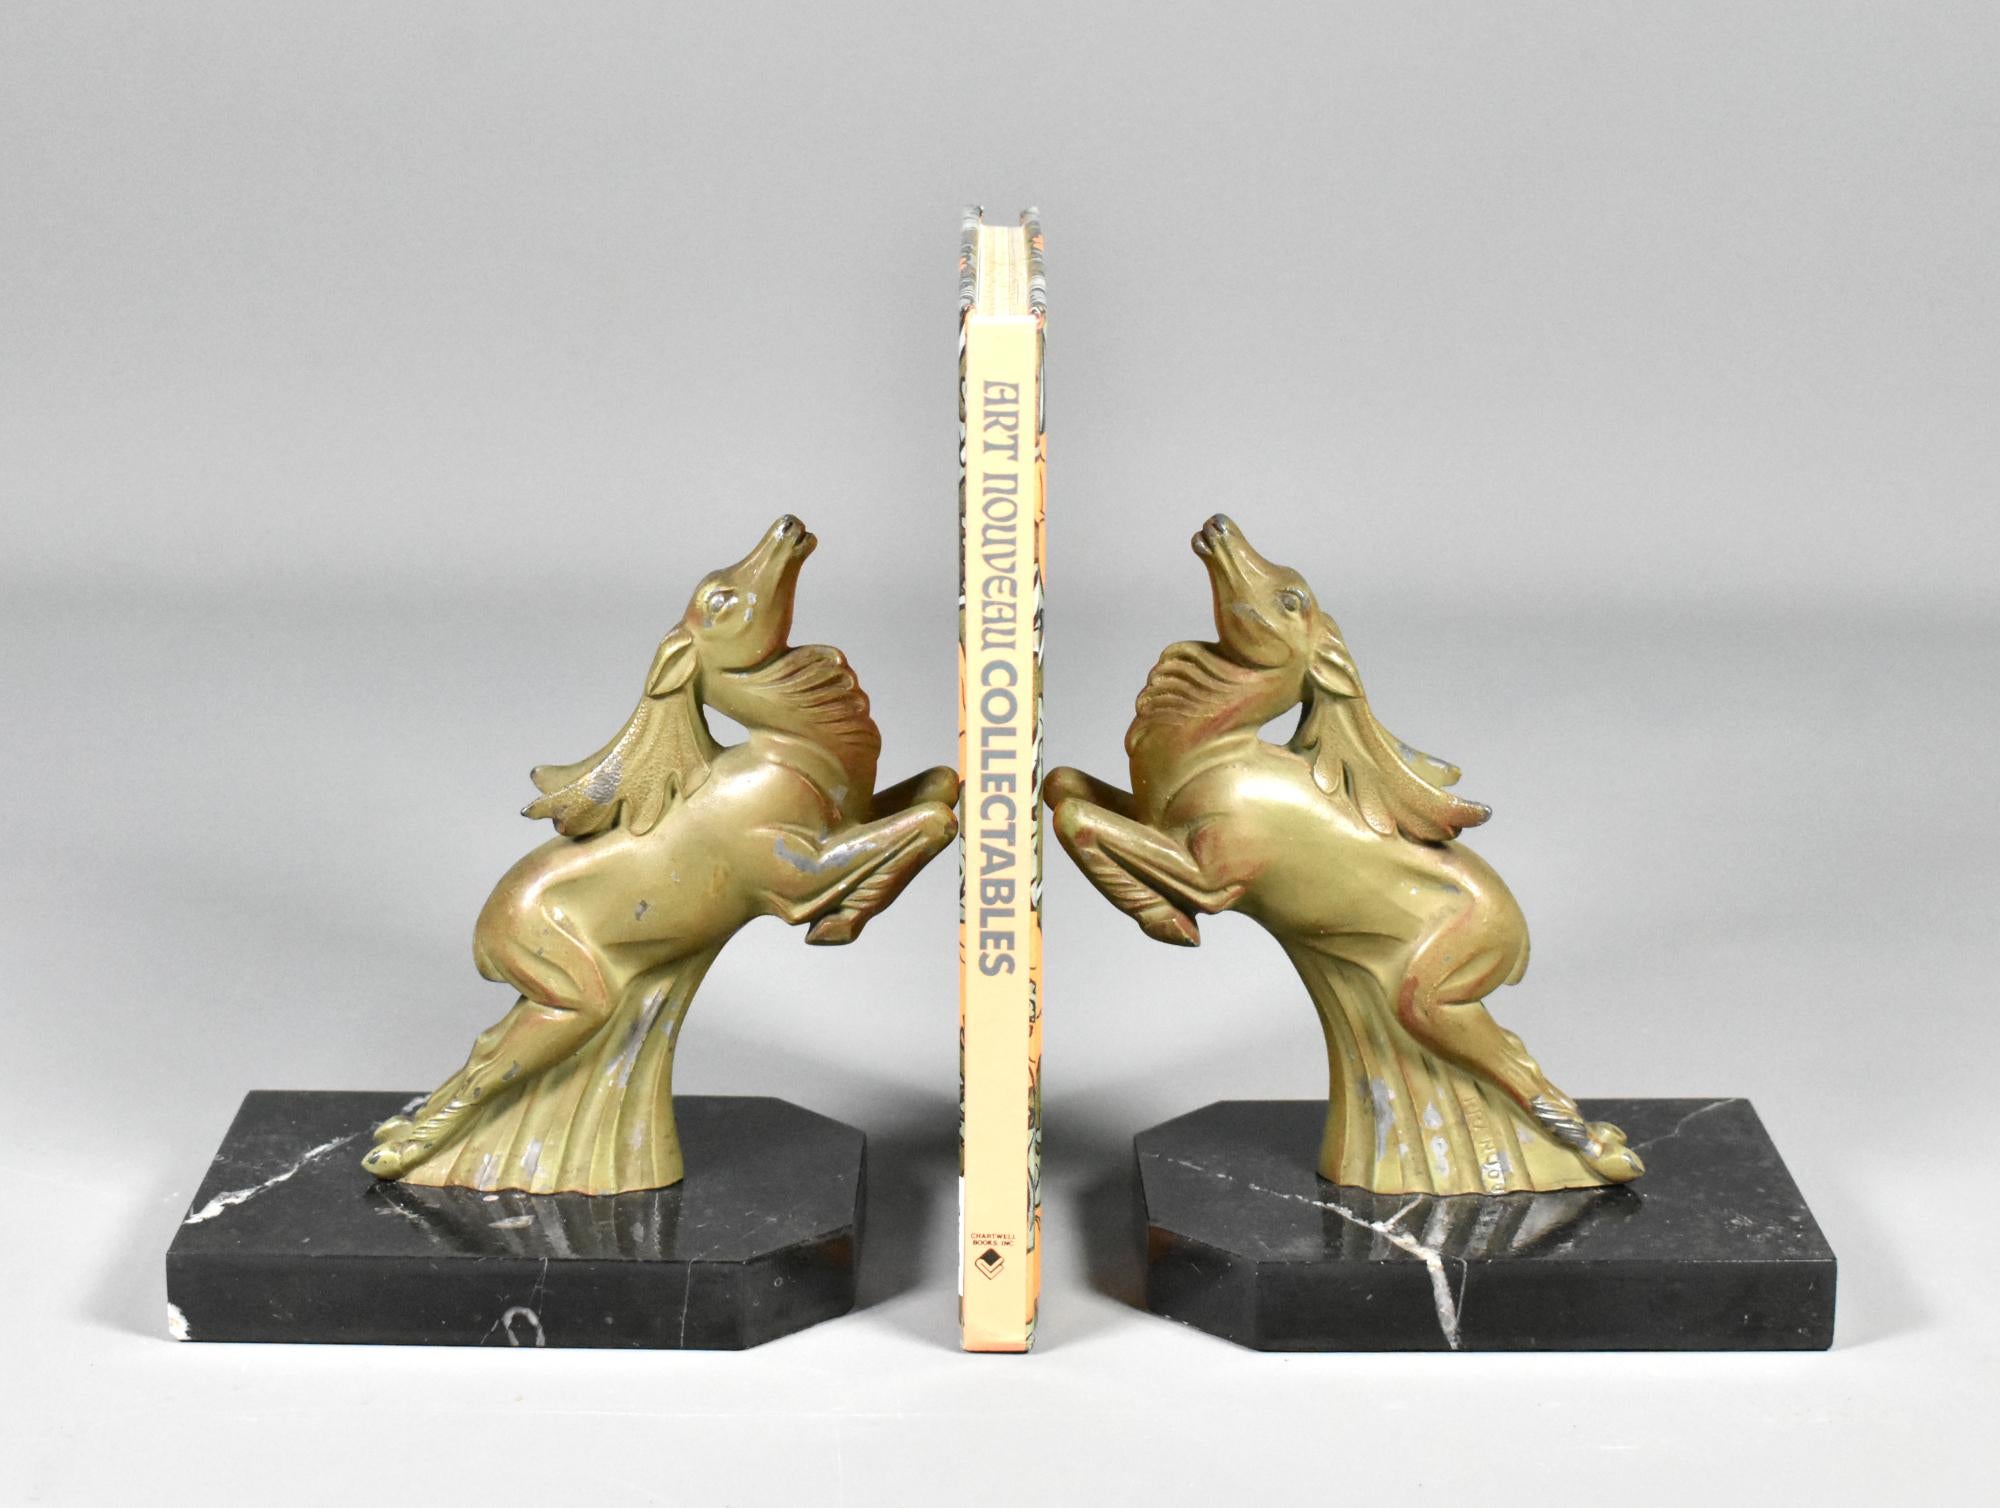 Pair of Art Deco Ibex Bookends signed Franjou (Hippolyte Moreau) 

An attractive pair of matching Art Deco bookends signed Franjou, pseudonym of the famous French sculptor Hippolyte Moreau (1832-1926). 

Moreau studied under Francois Jouffroy in